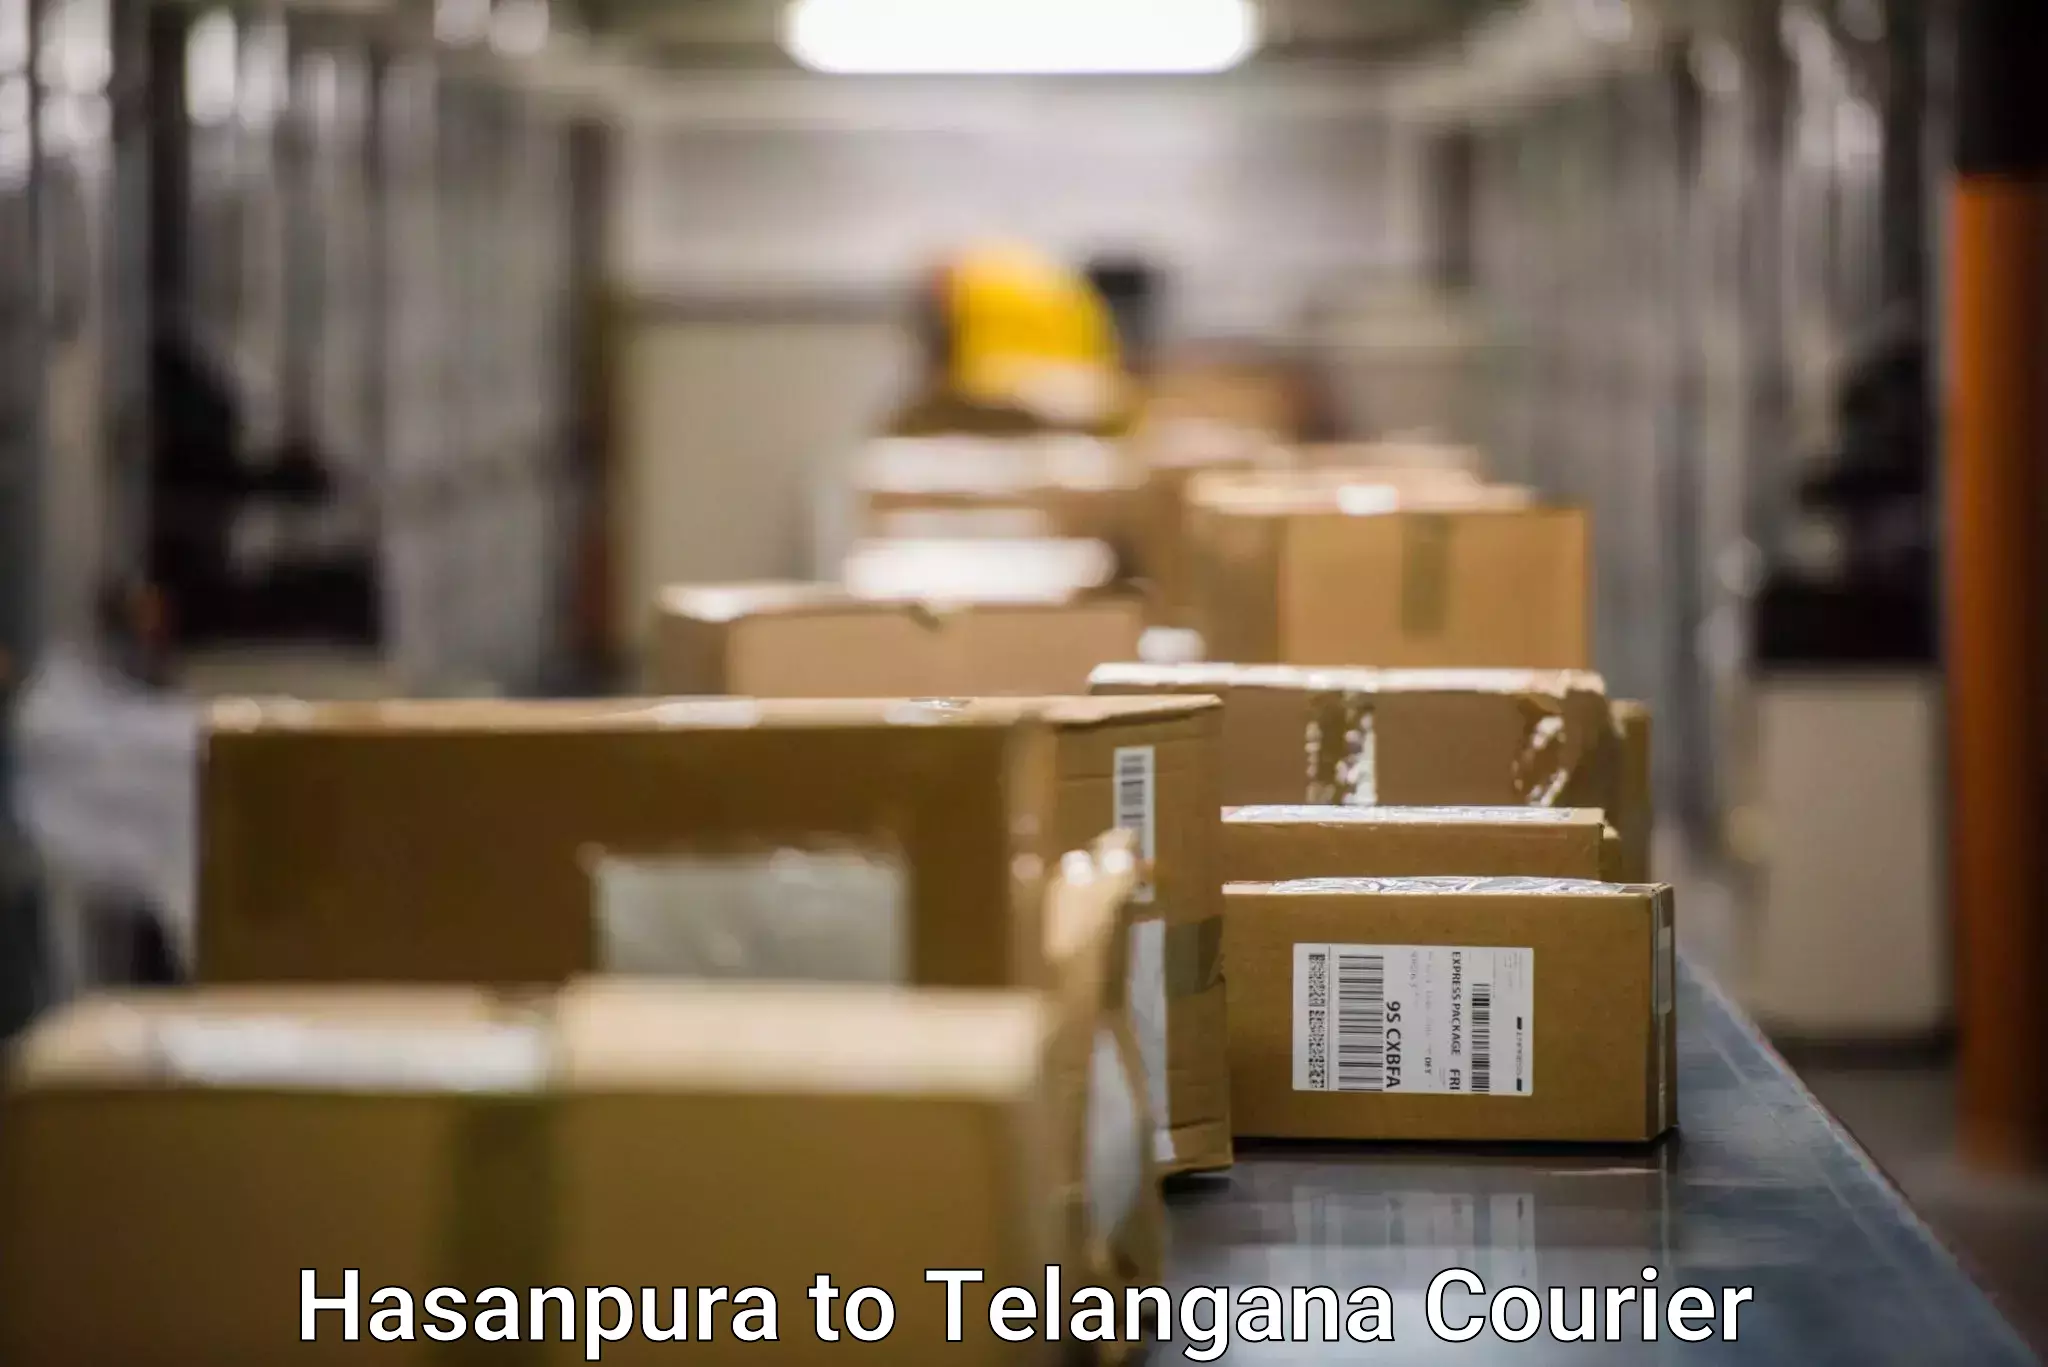 Residential courier service in Hasanpura to Padmajiwadi